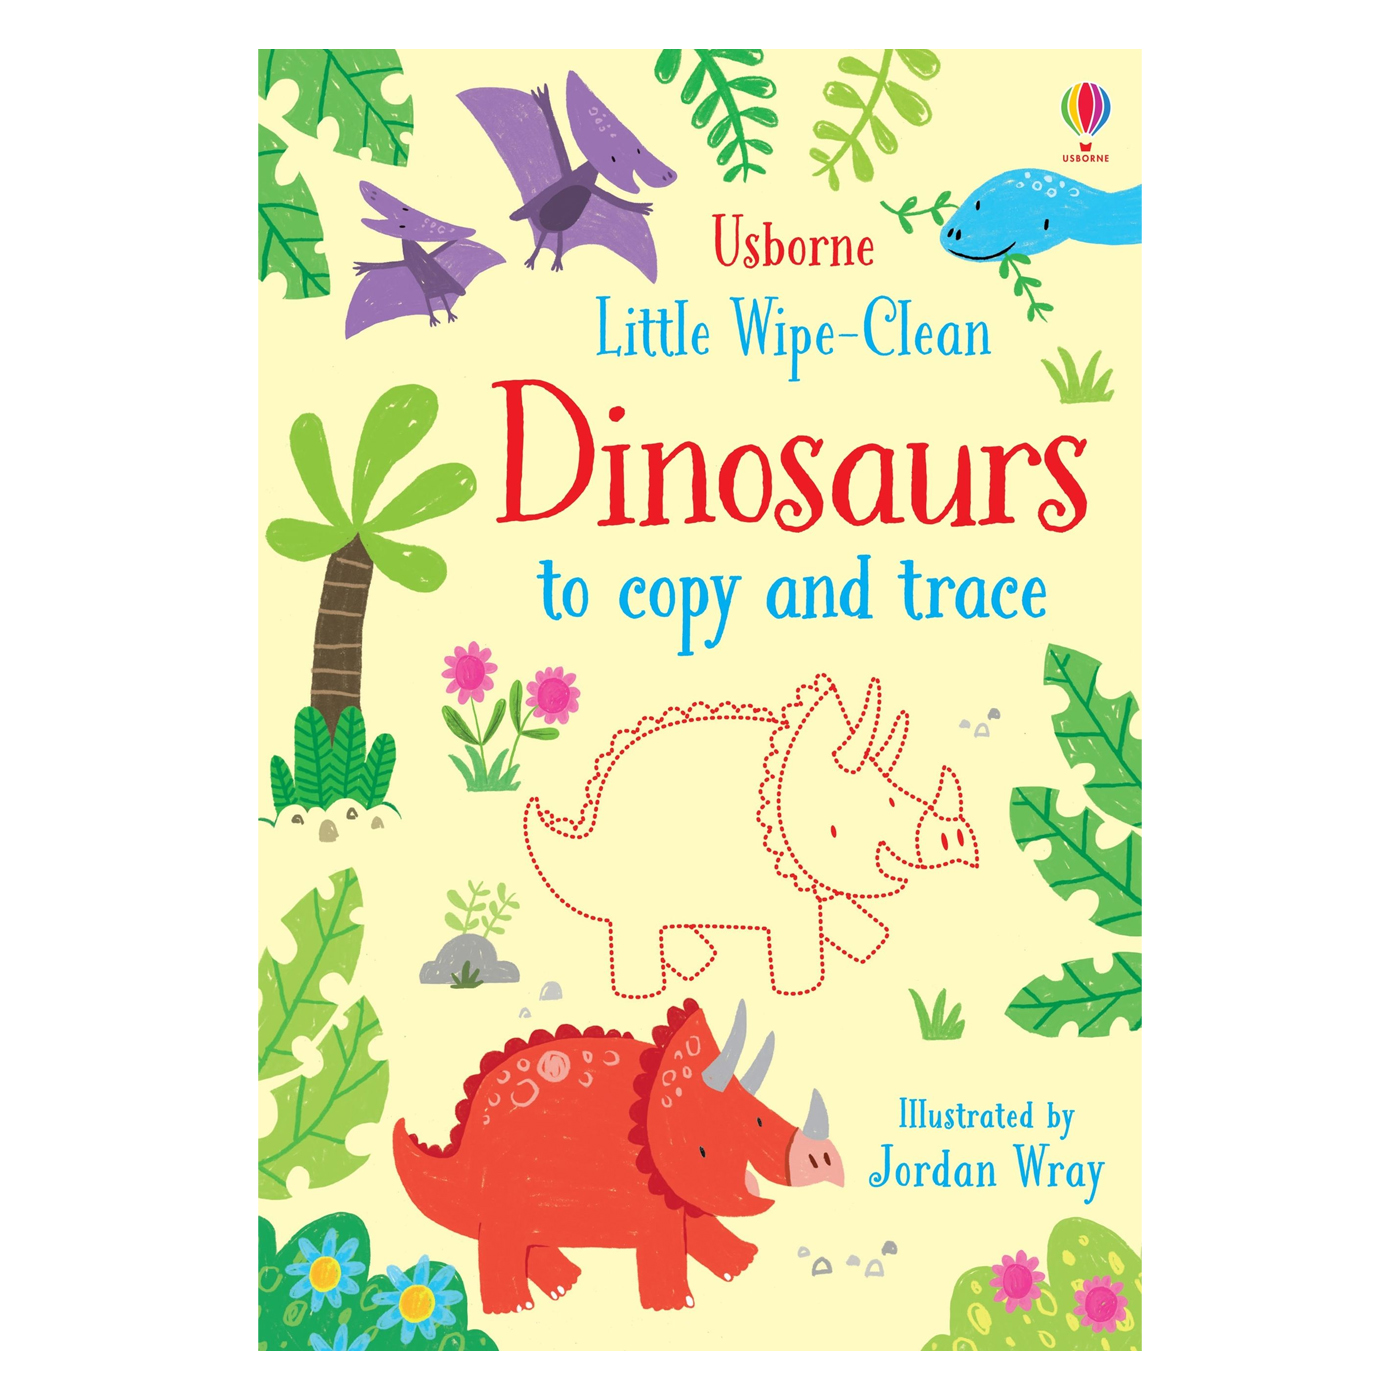 USBORNE Little Wipe-Clean Dinosaurs to copy and trac